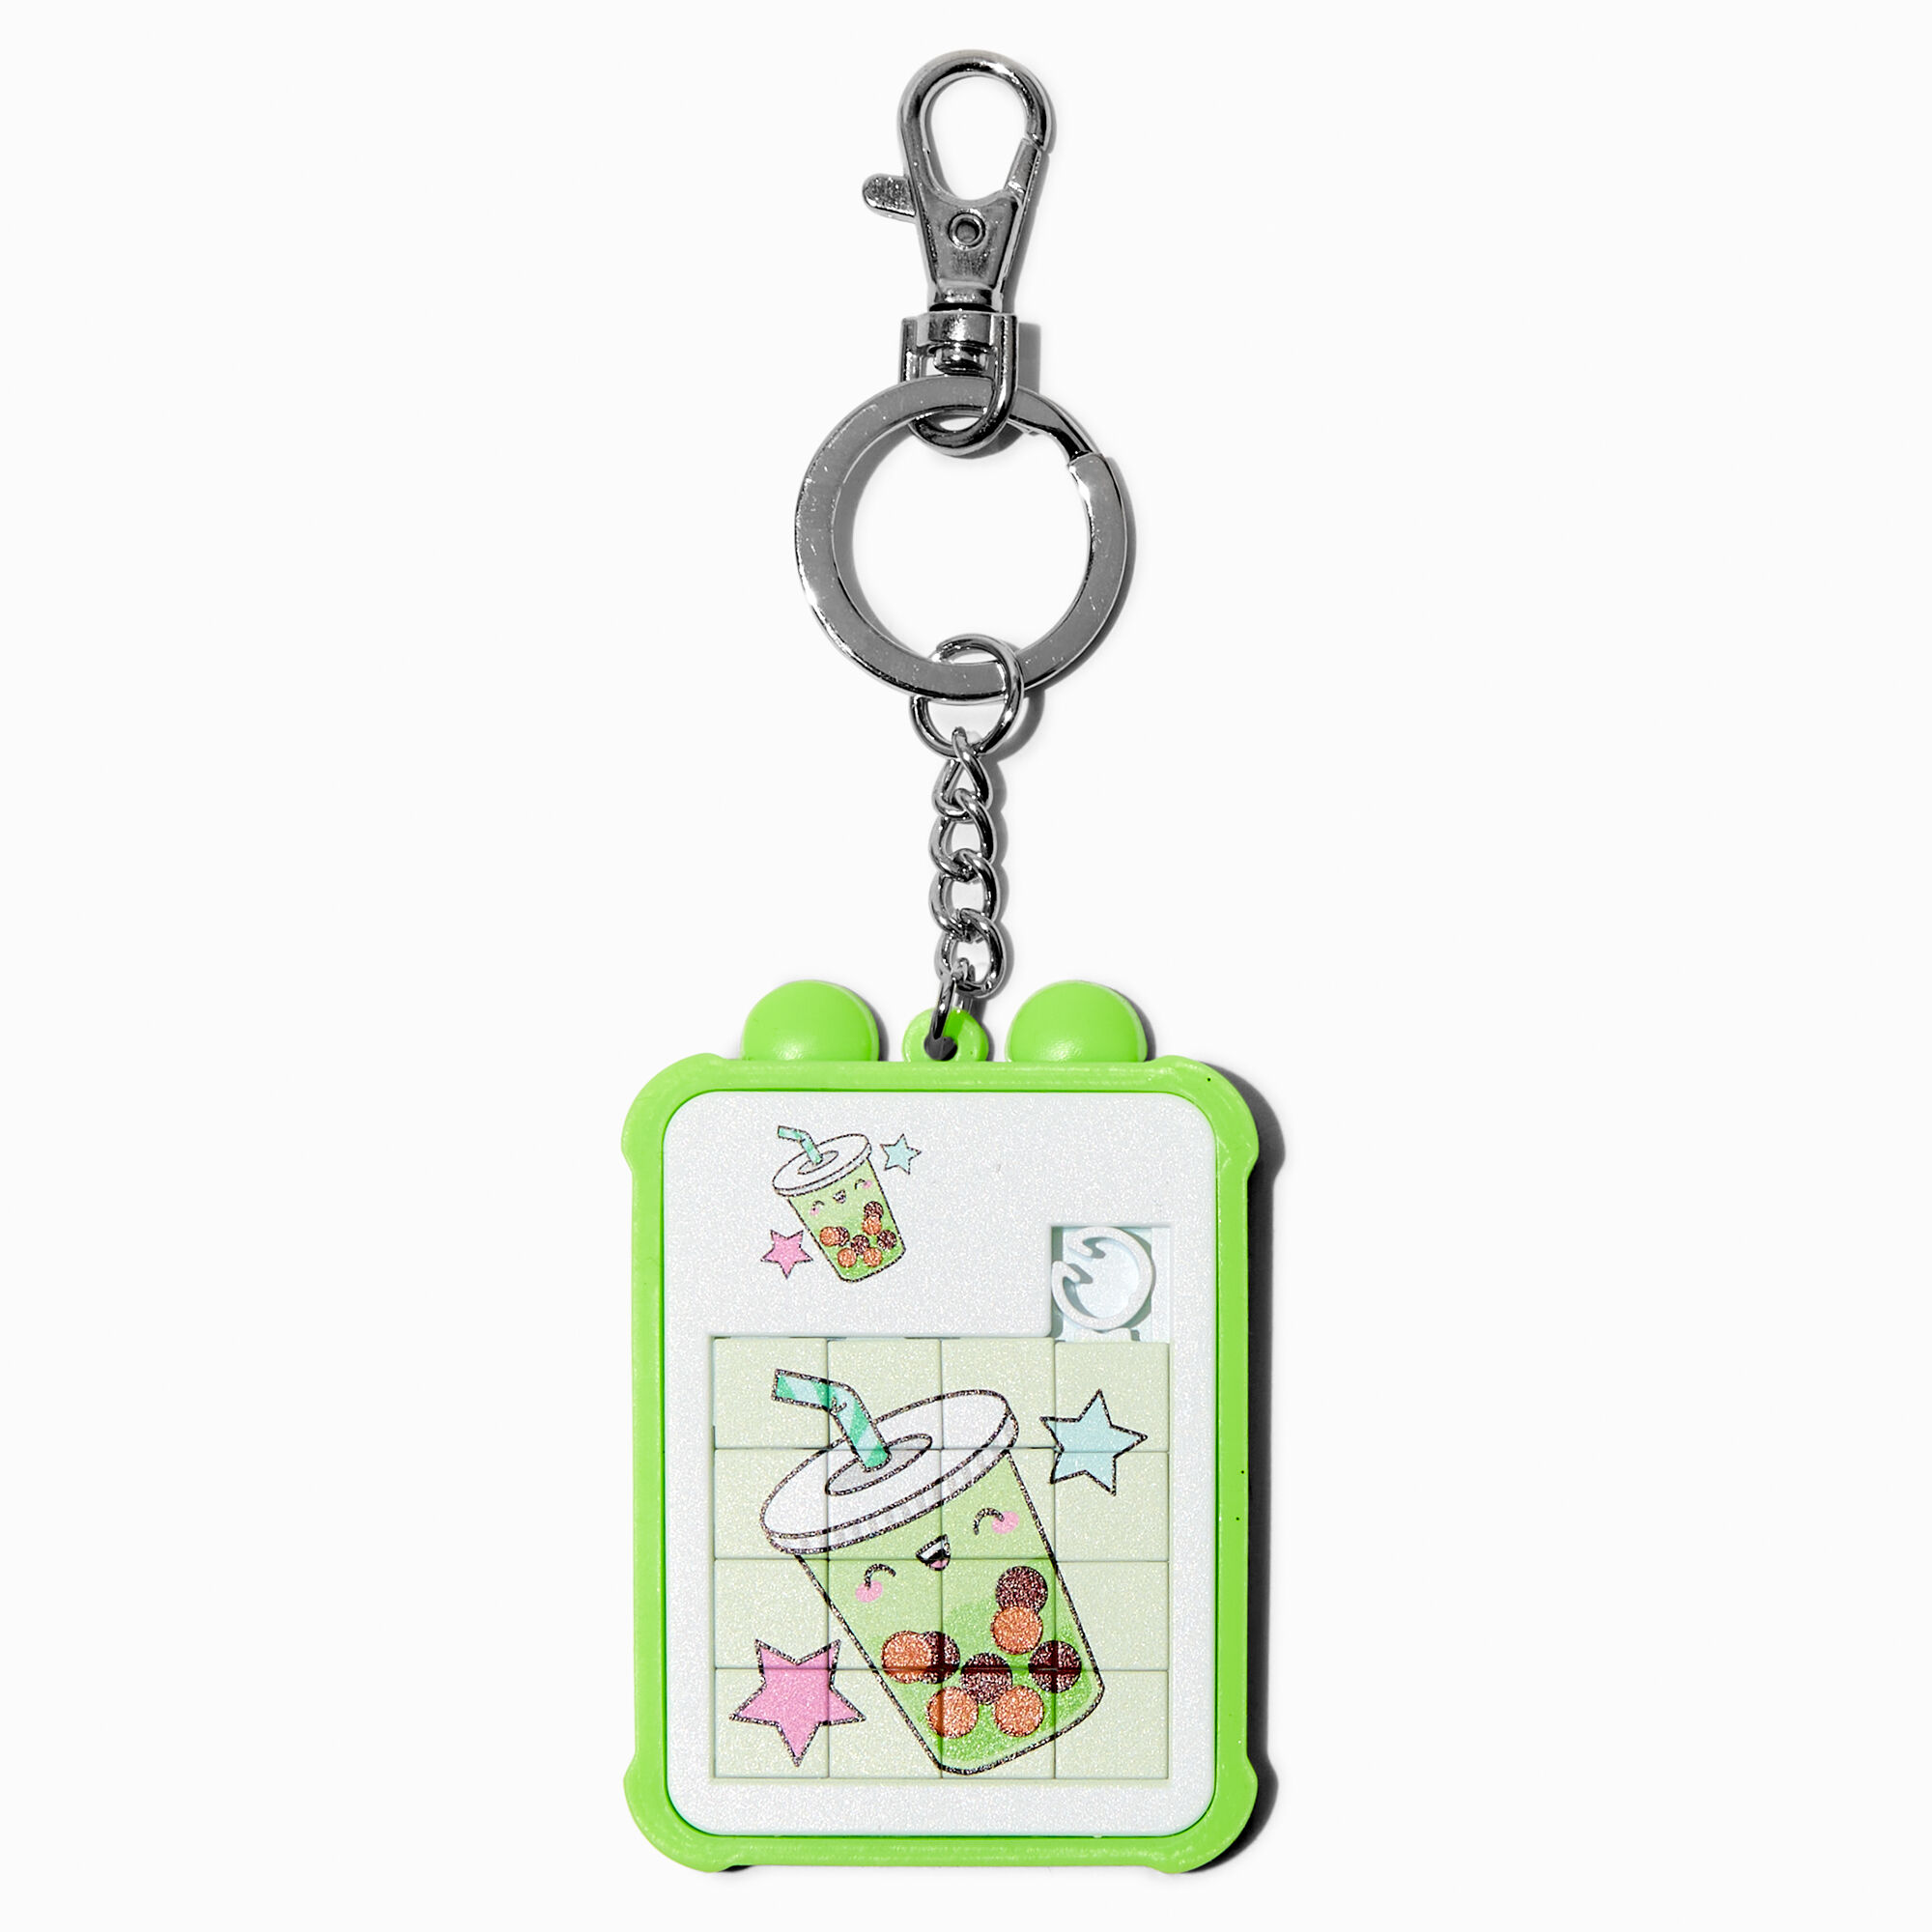 View Claires Boba Slider Game Keychain information